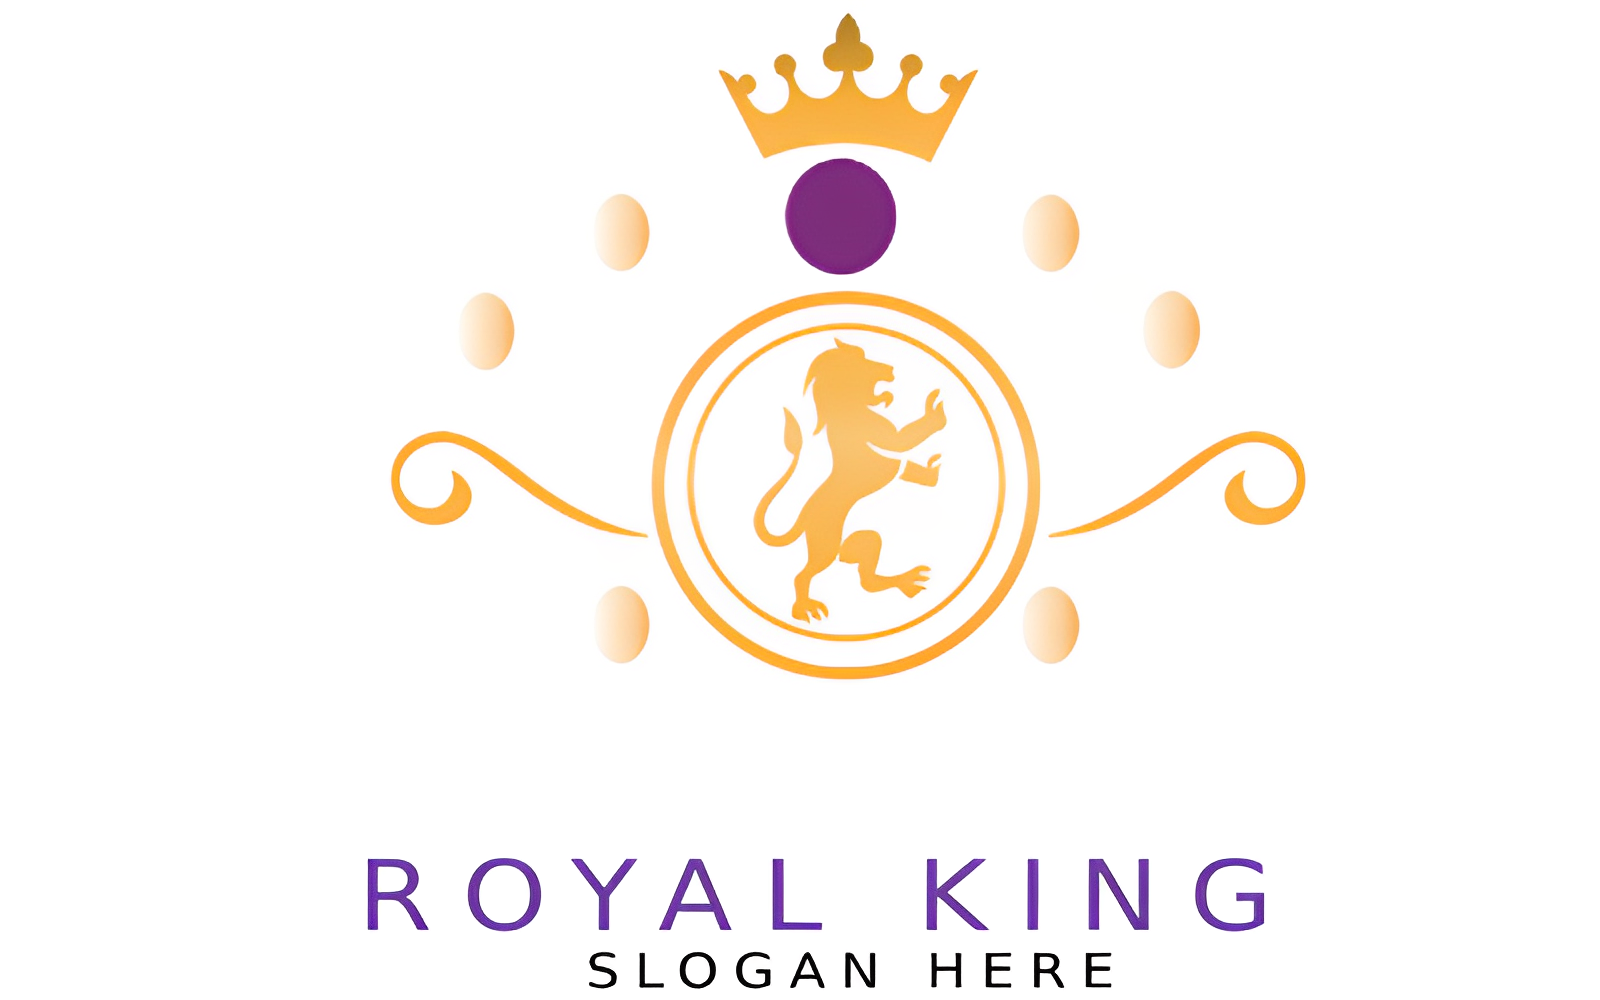 Logo royal king in new style